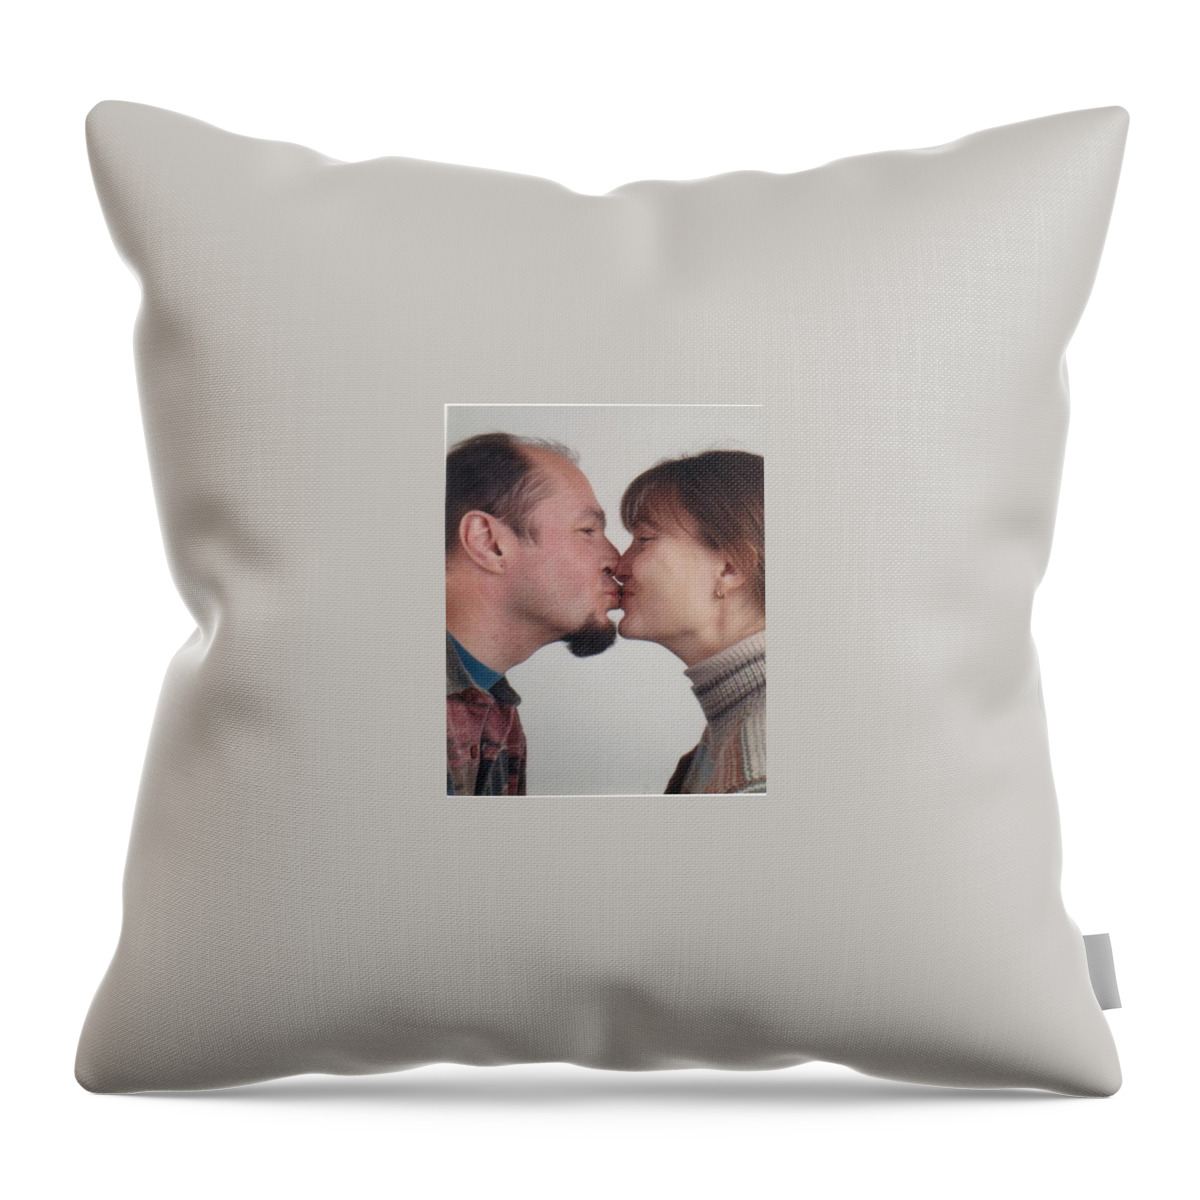  Throw Pillow featuring the photograph Contest - The Kiss by Anna Ruzsan